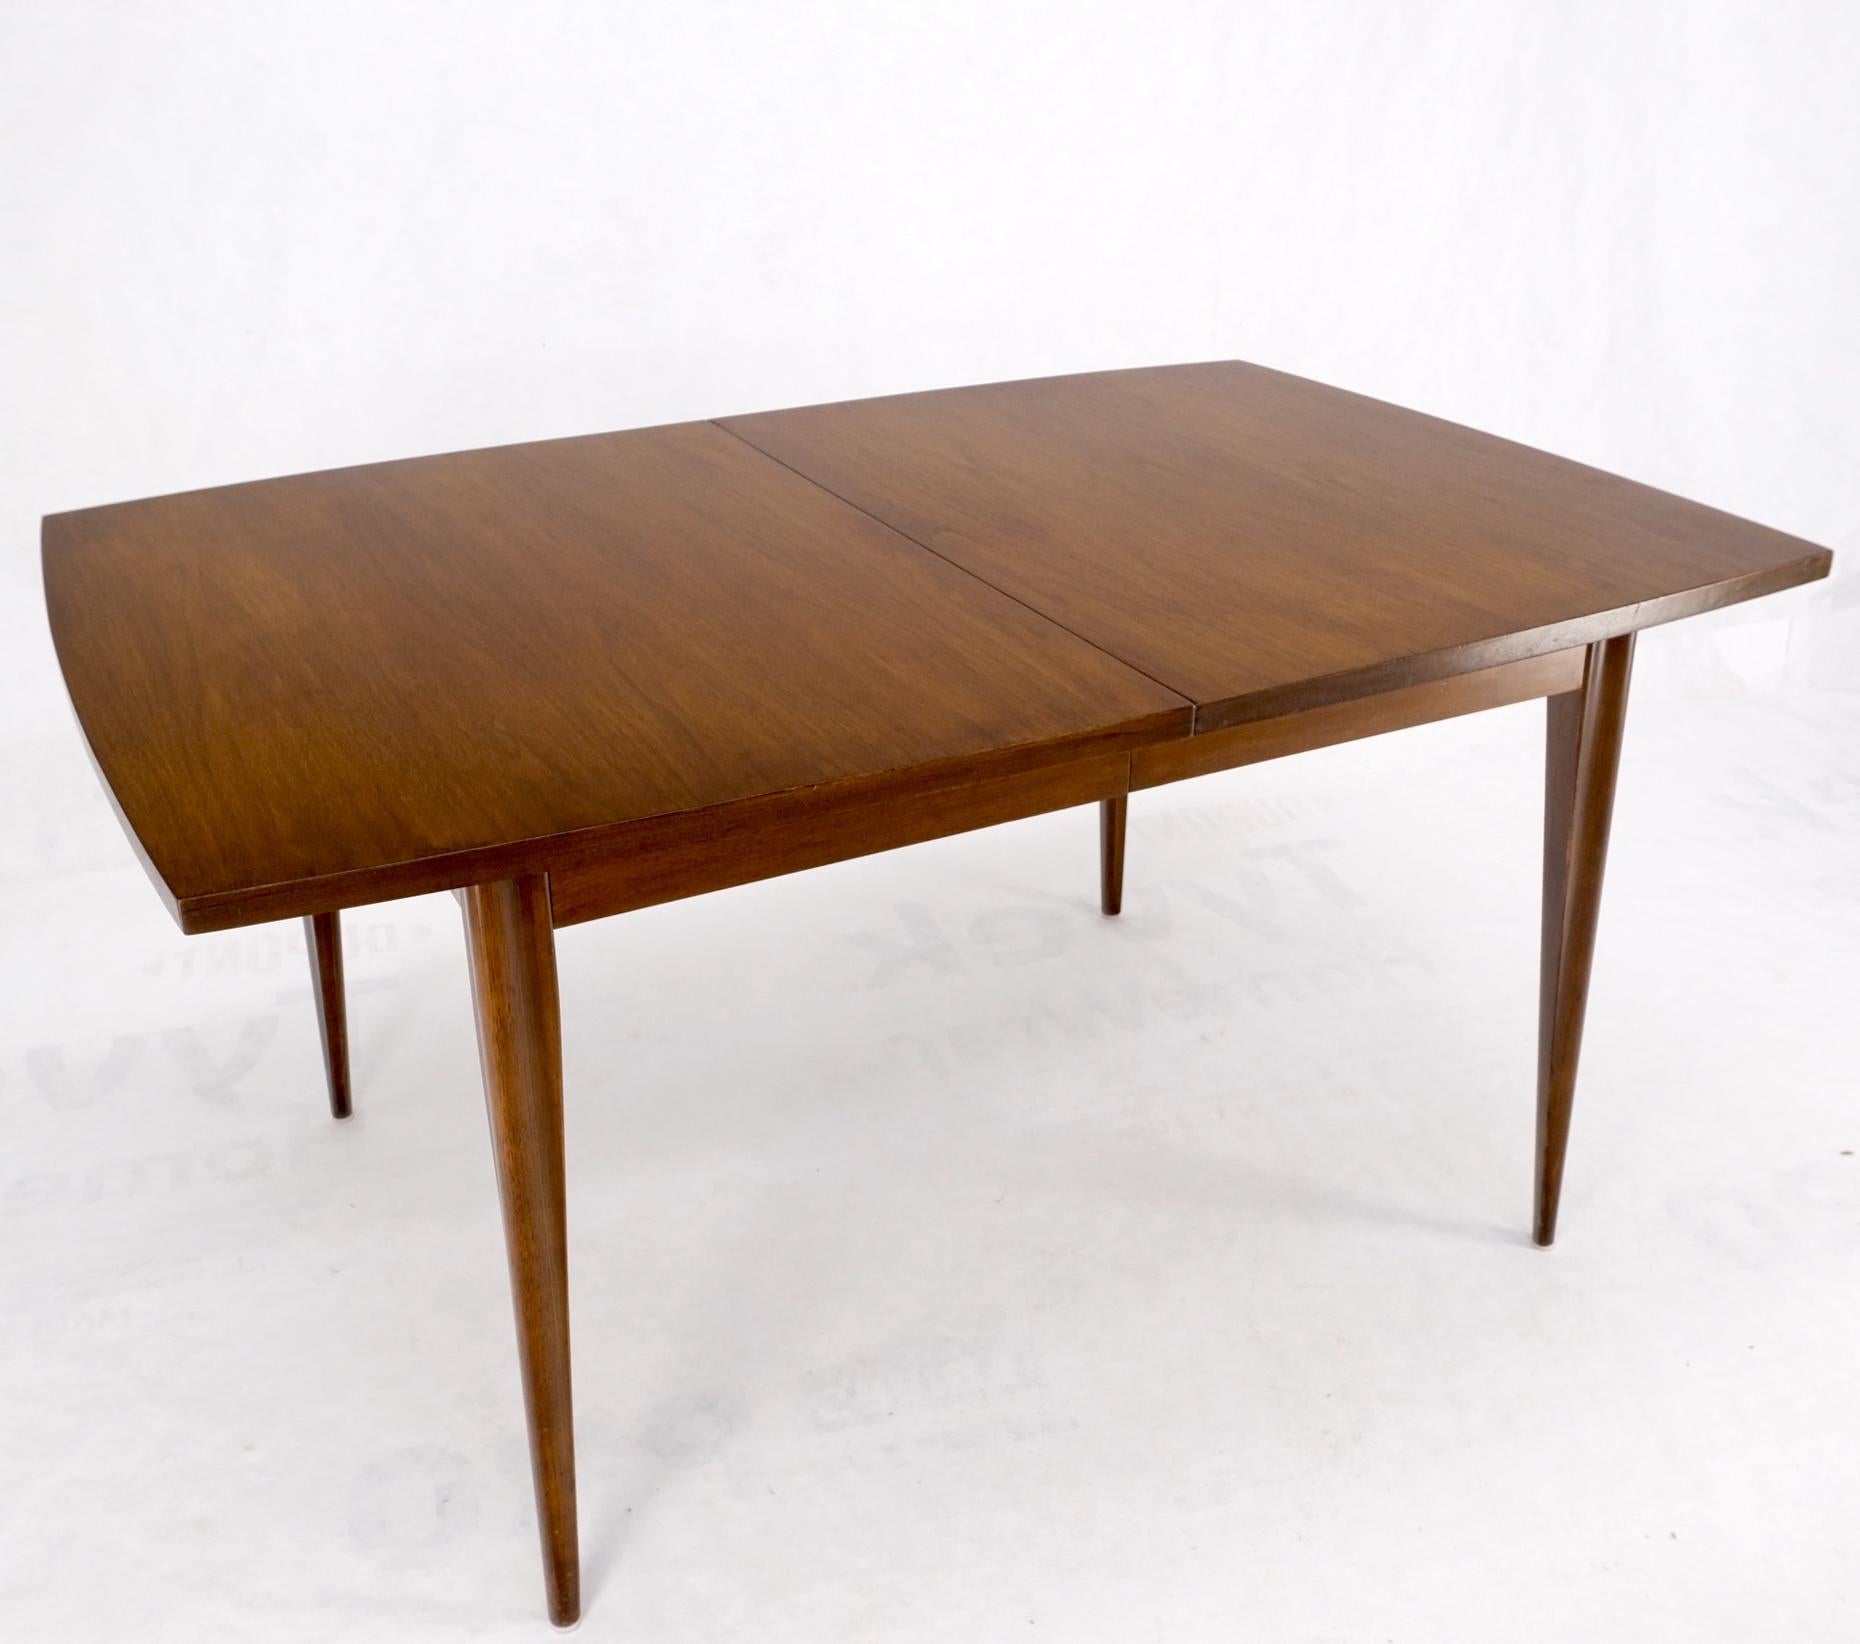 American Walnut Danish Modern Style Boat Shape Dining Table w/ 3 Leaves Mint,
Three table leaves measuring 12'' (inches) each.